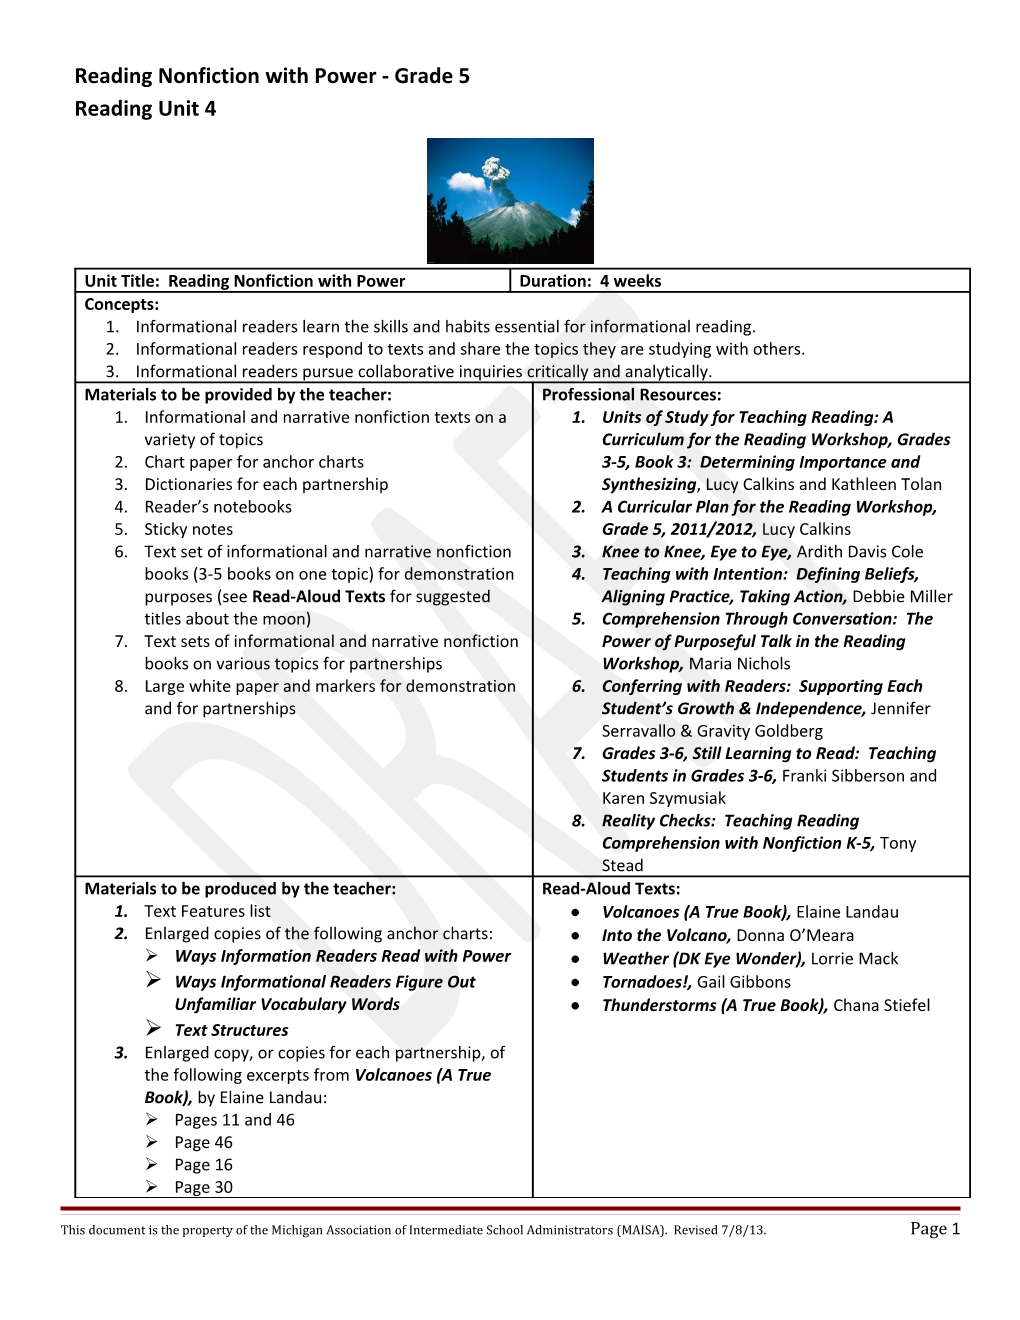 Overview of Sessions Teaching and Learning Points Aligned with the Common Core